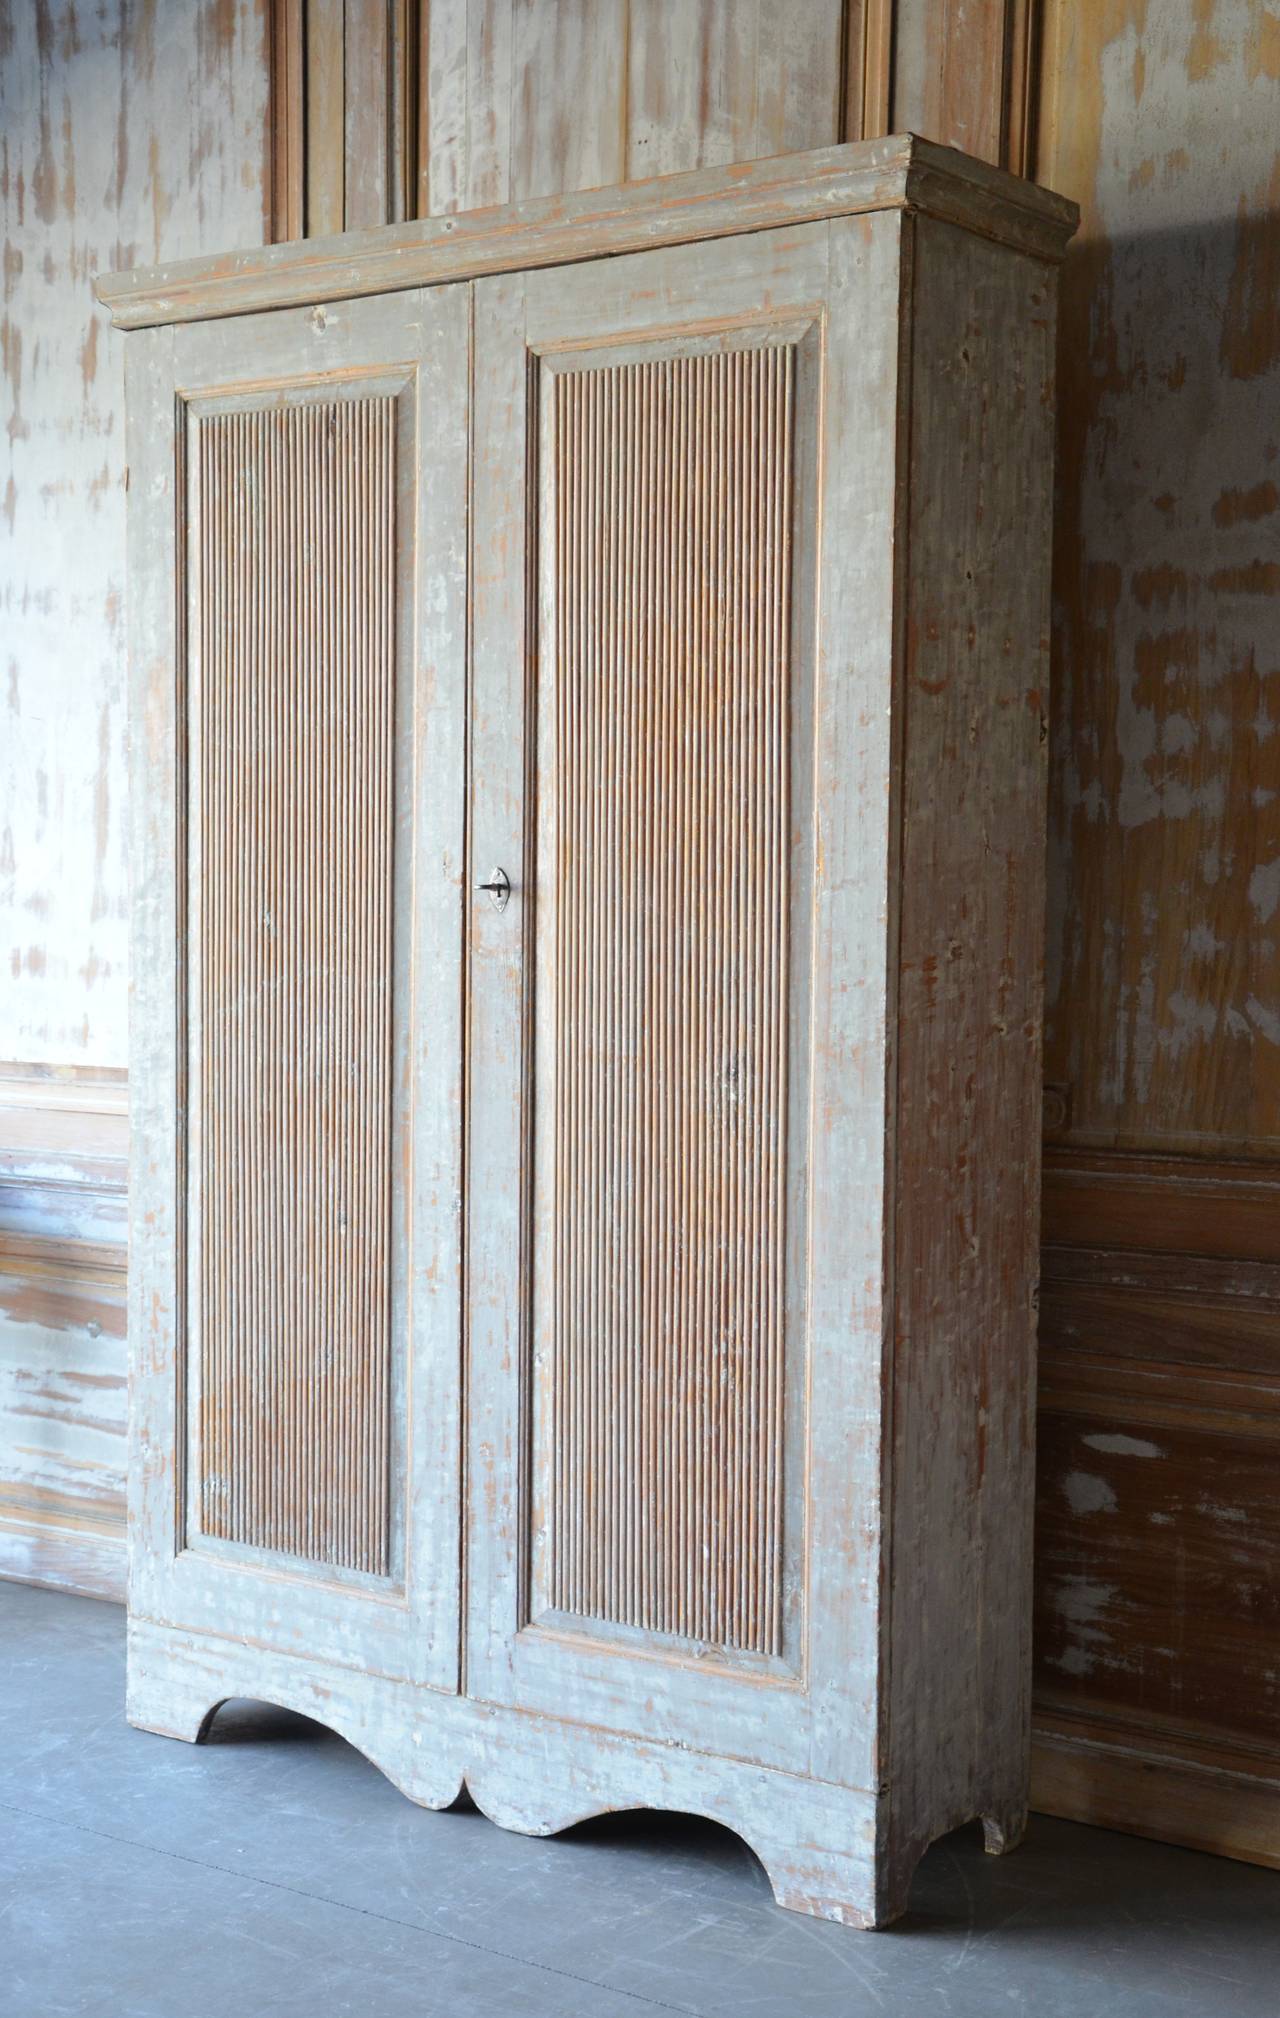 Very Classic styling of Gustavian period tall cabinet or armoire with panelled and reeded doors, beautifully shaped and carved apron to the front and sides.
Sweden, circa 1790.